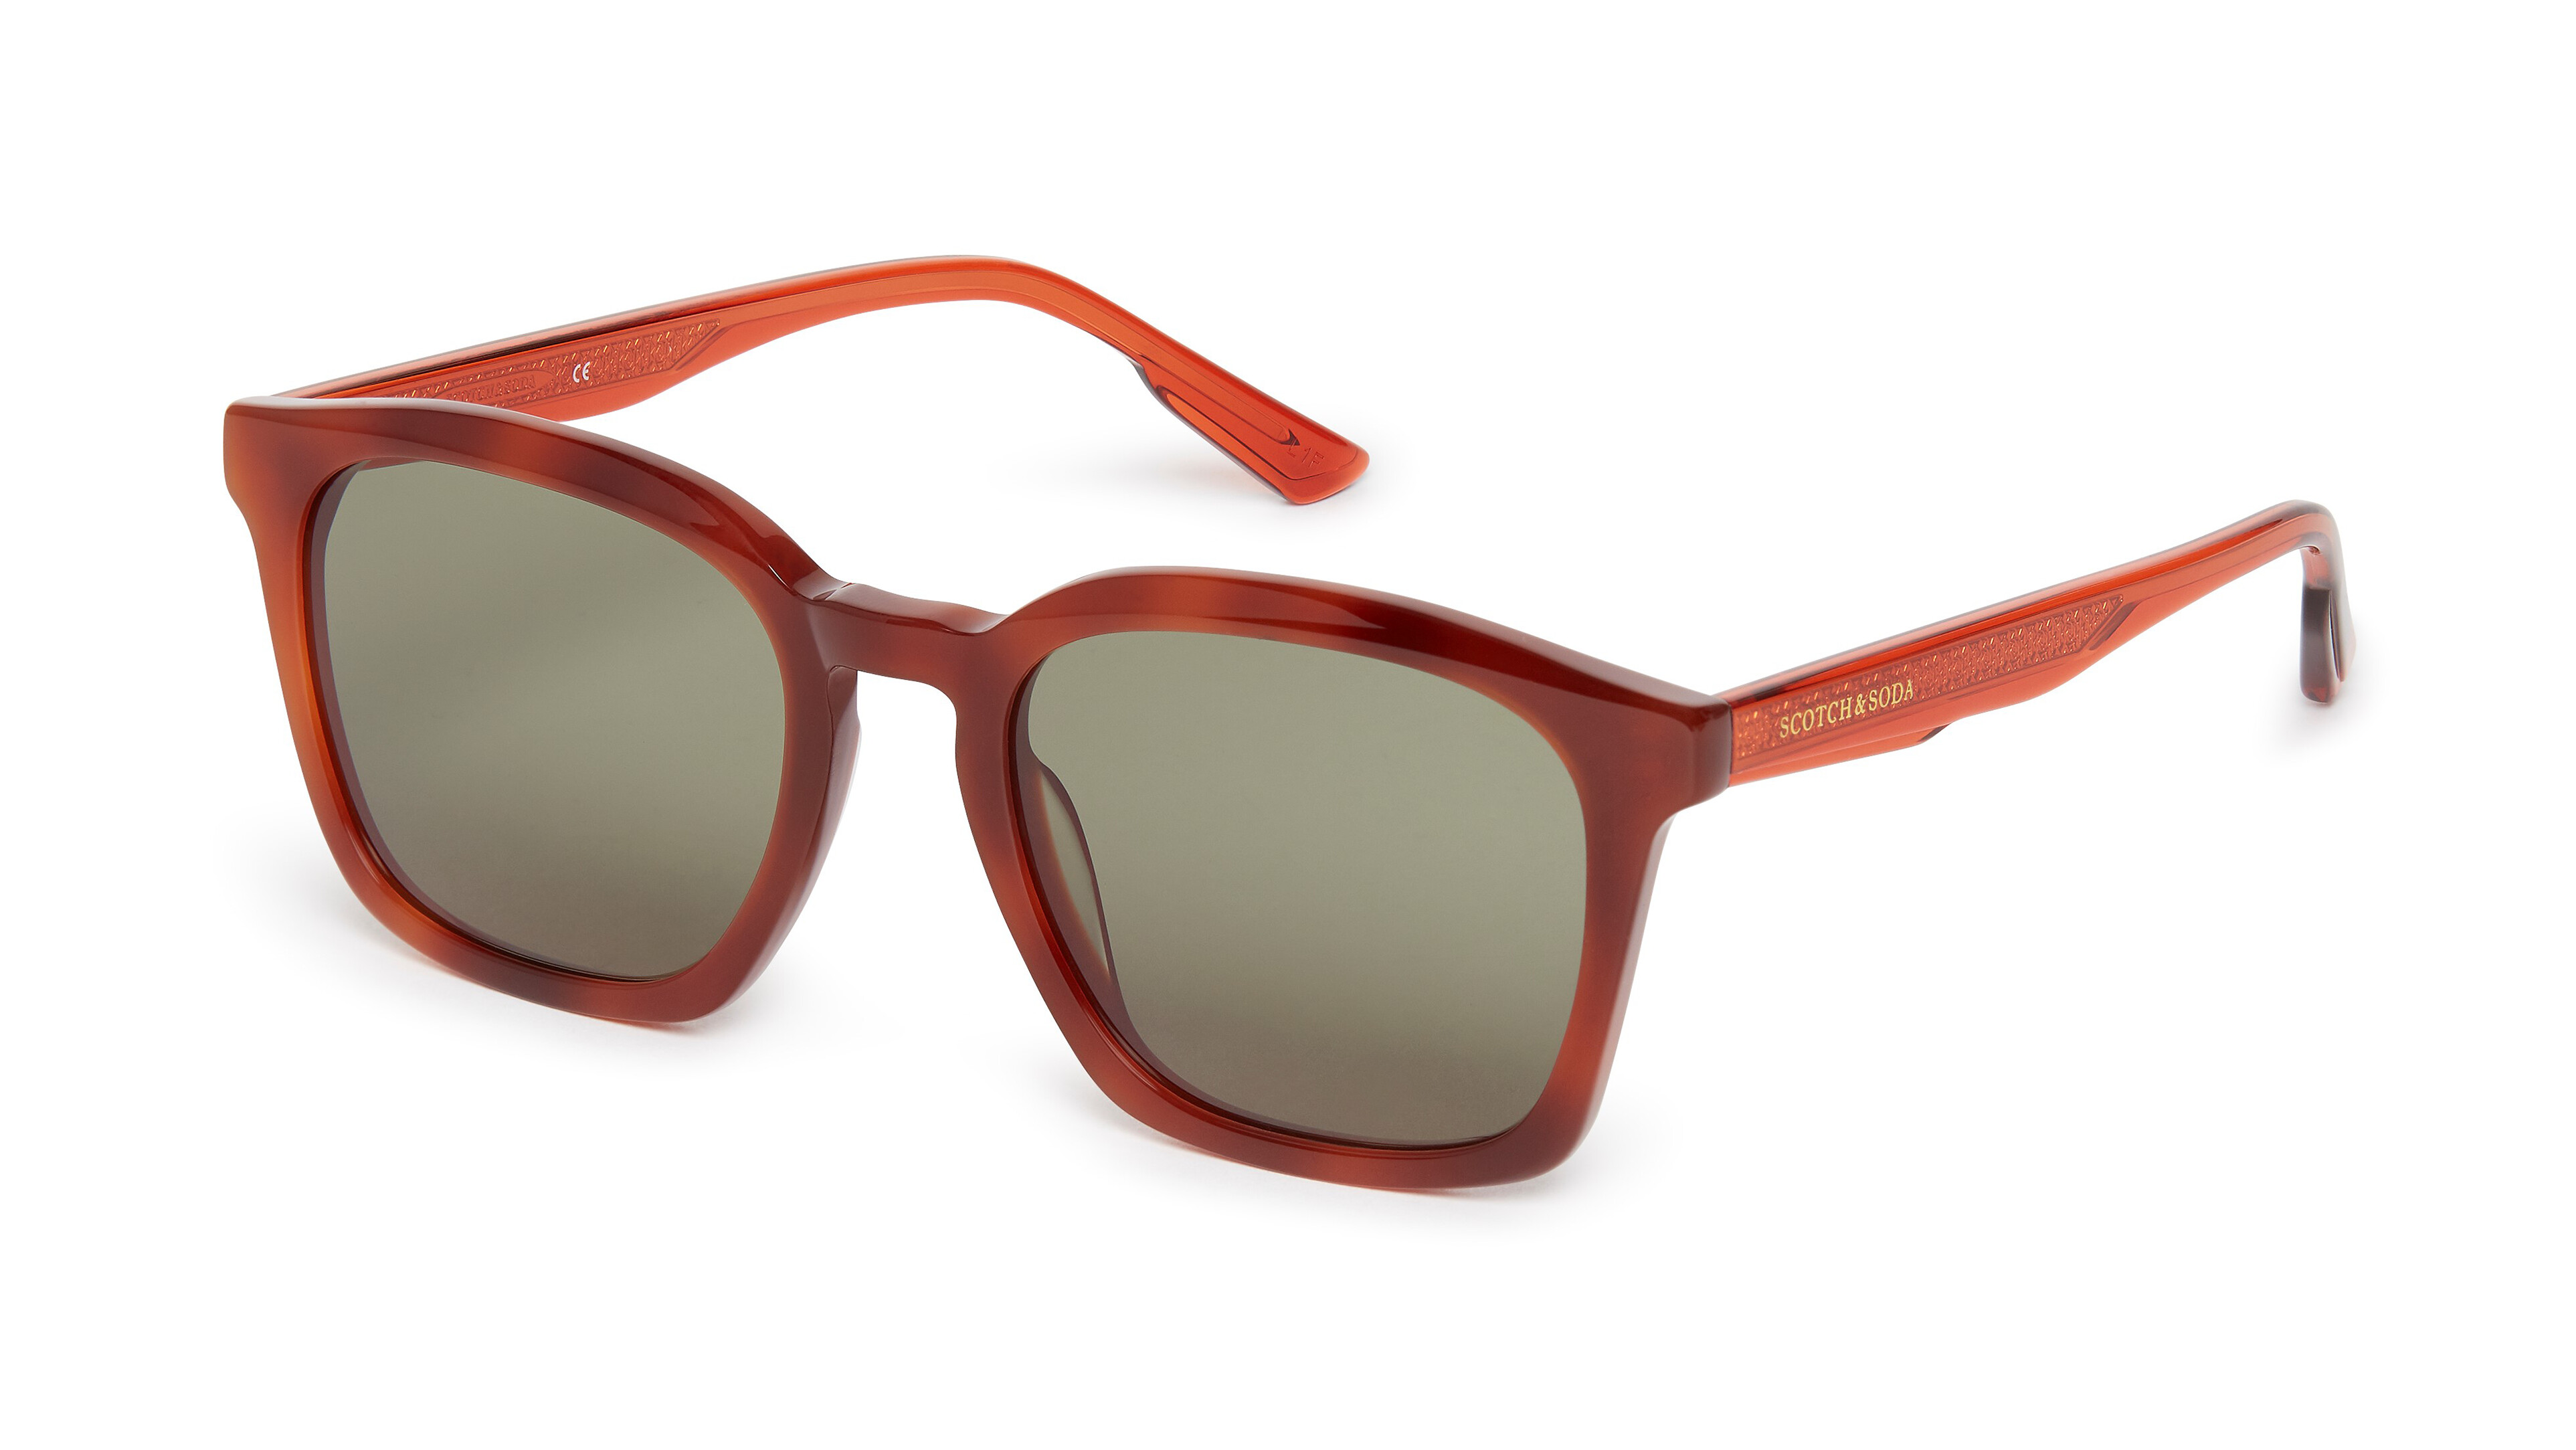 [products.image.front] Scotch & Soda 8006 131 Sonnenbrille